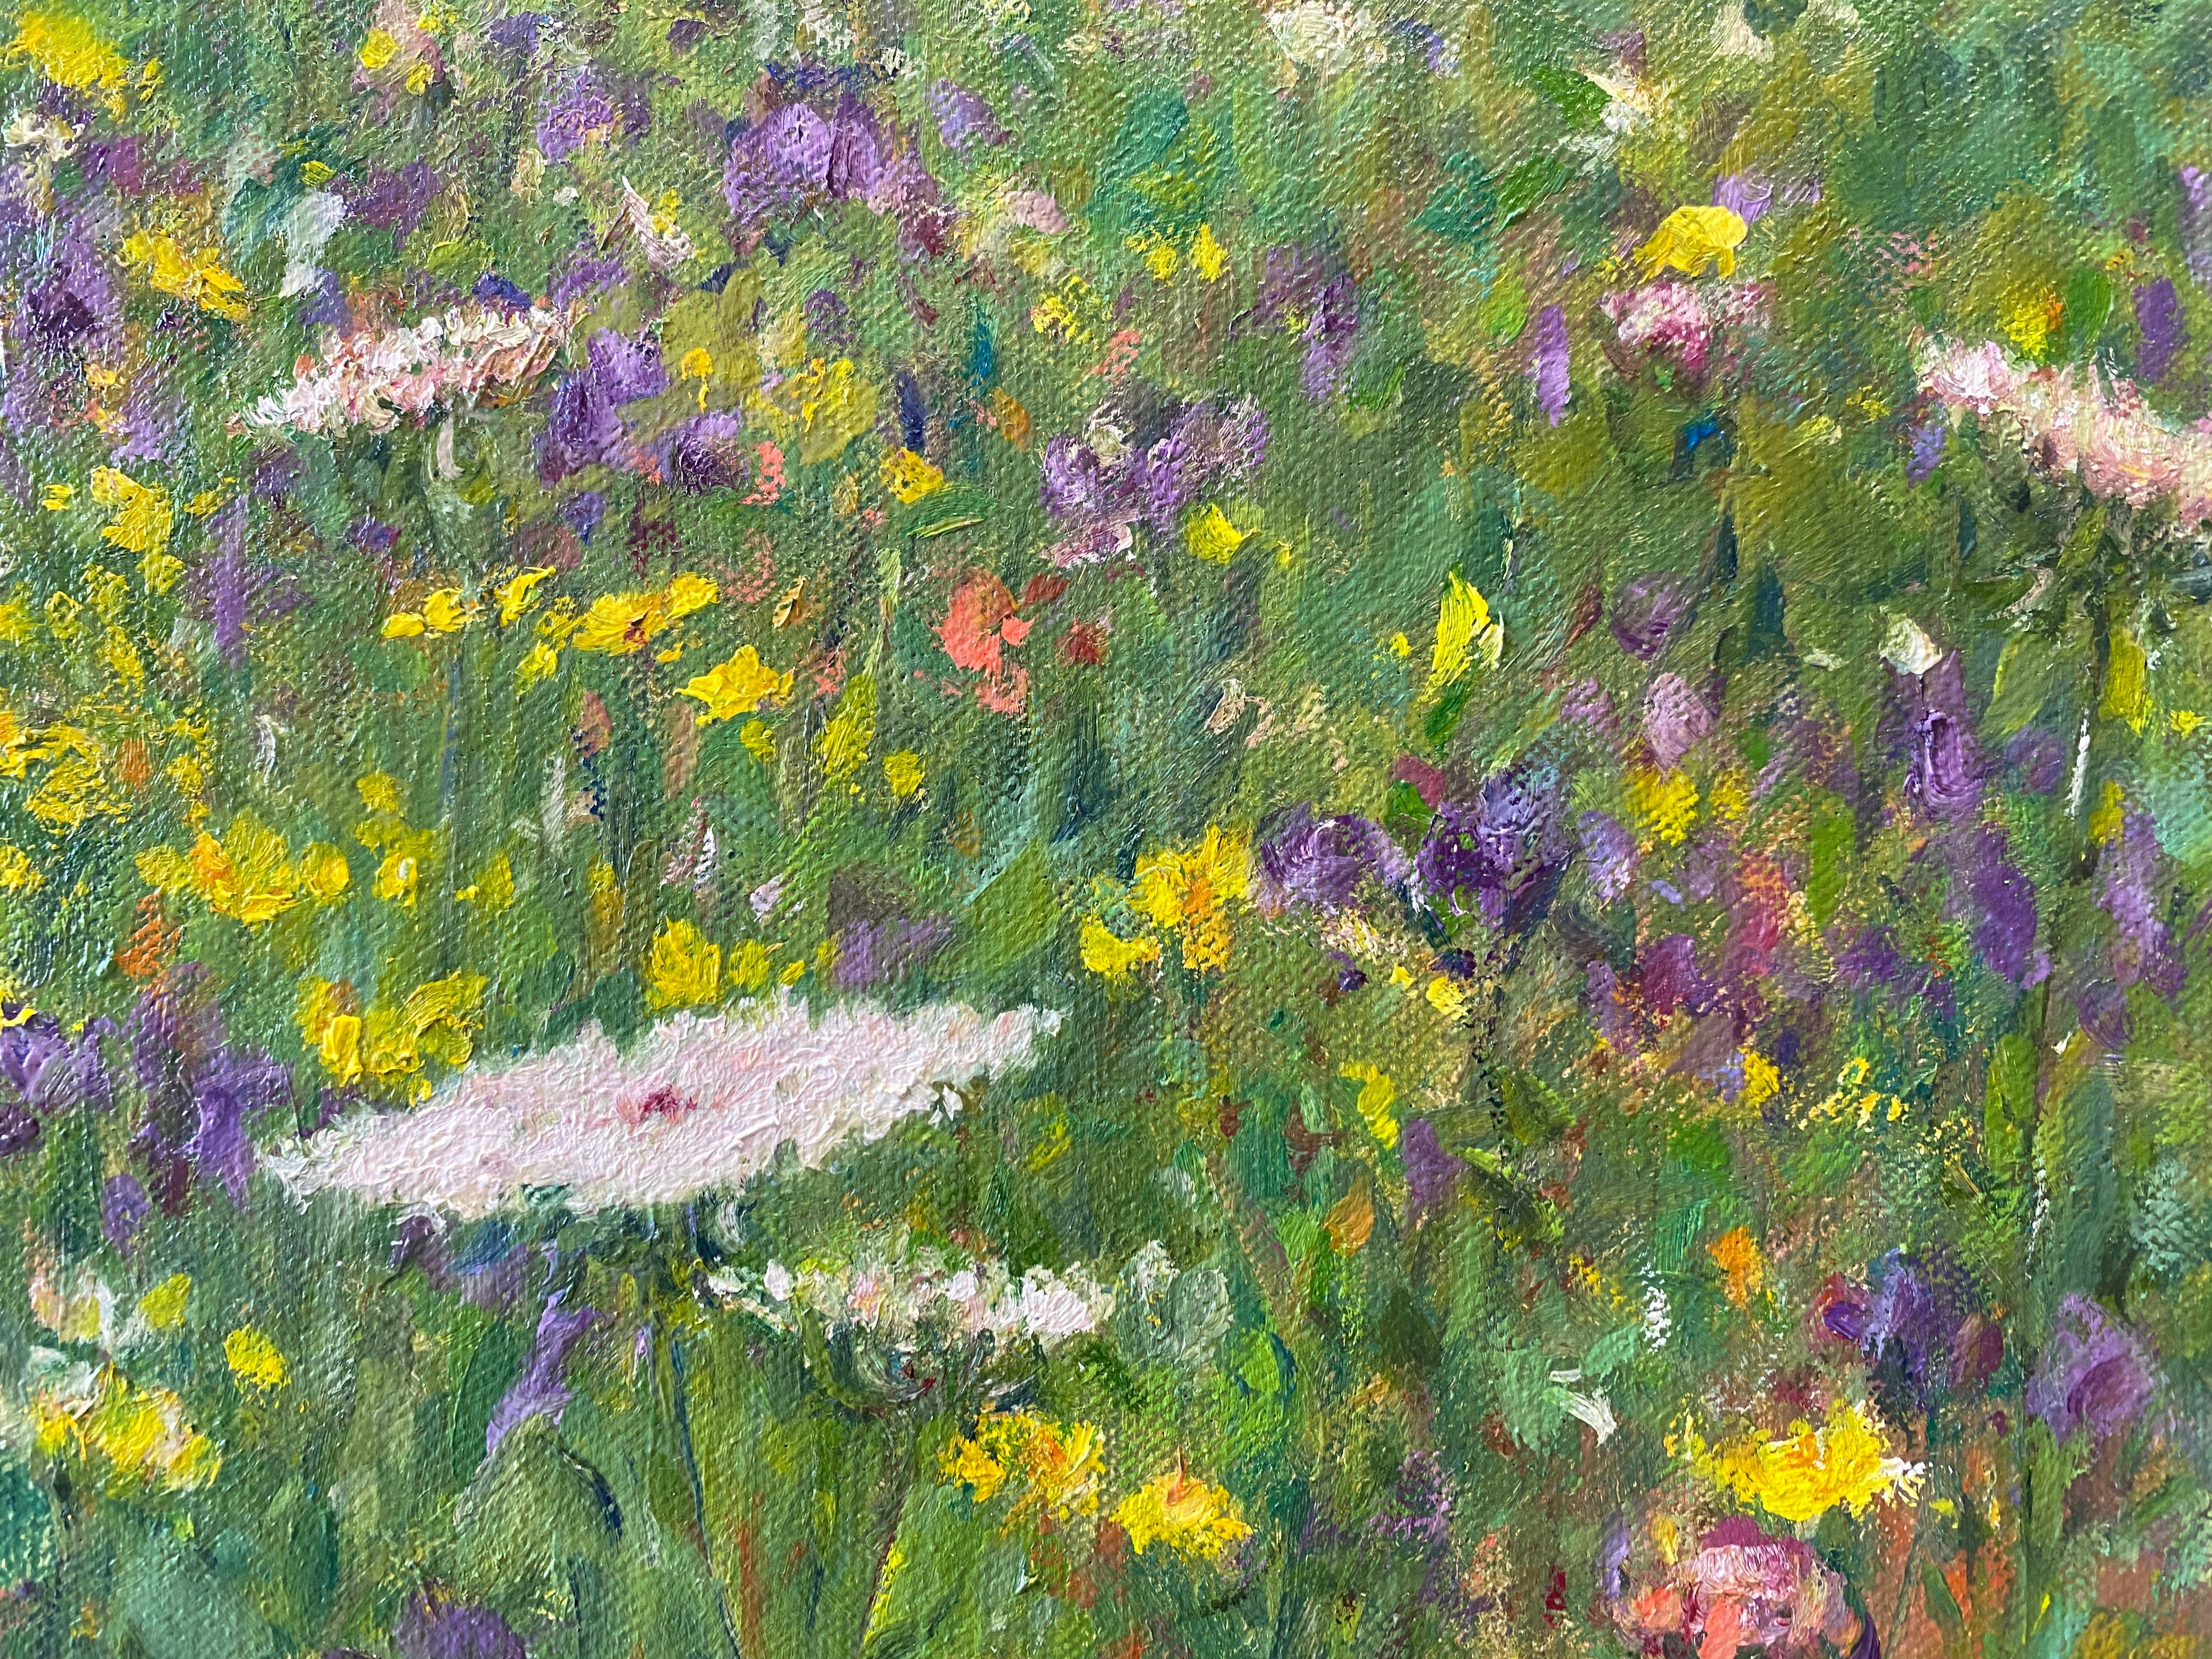 An oil painting of Wildflowers in a field. The painting's composition is a close-up of the field of flowers. There is no horizon, foreground or background. It's an all-over composition. A celebration of beauty in nature. Painted en plein air, in the